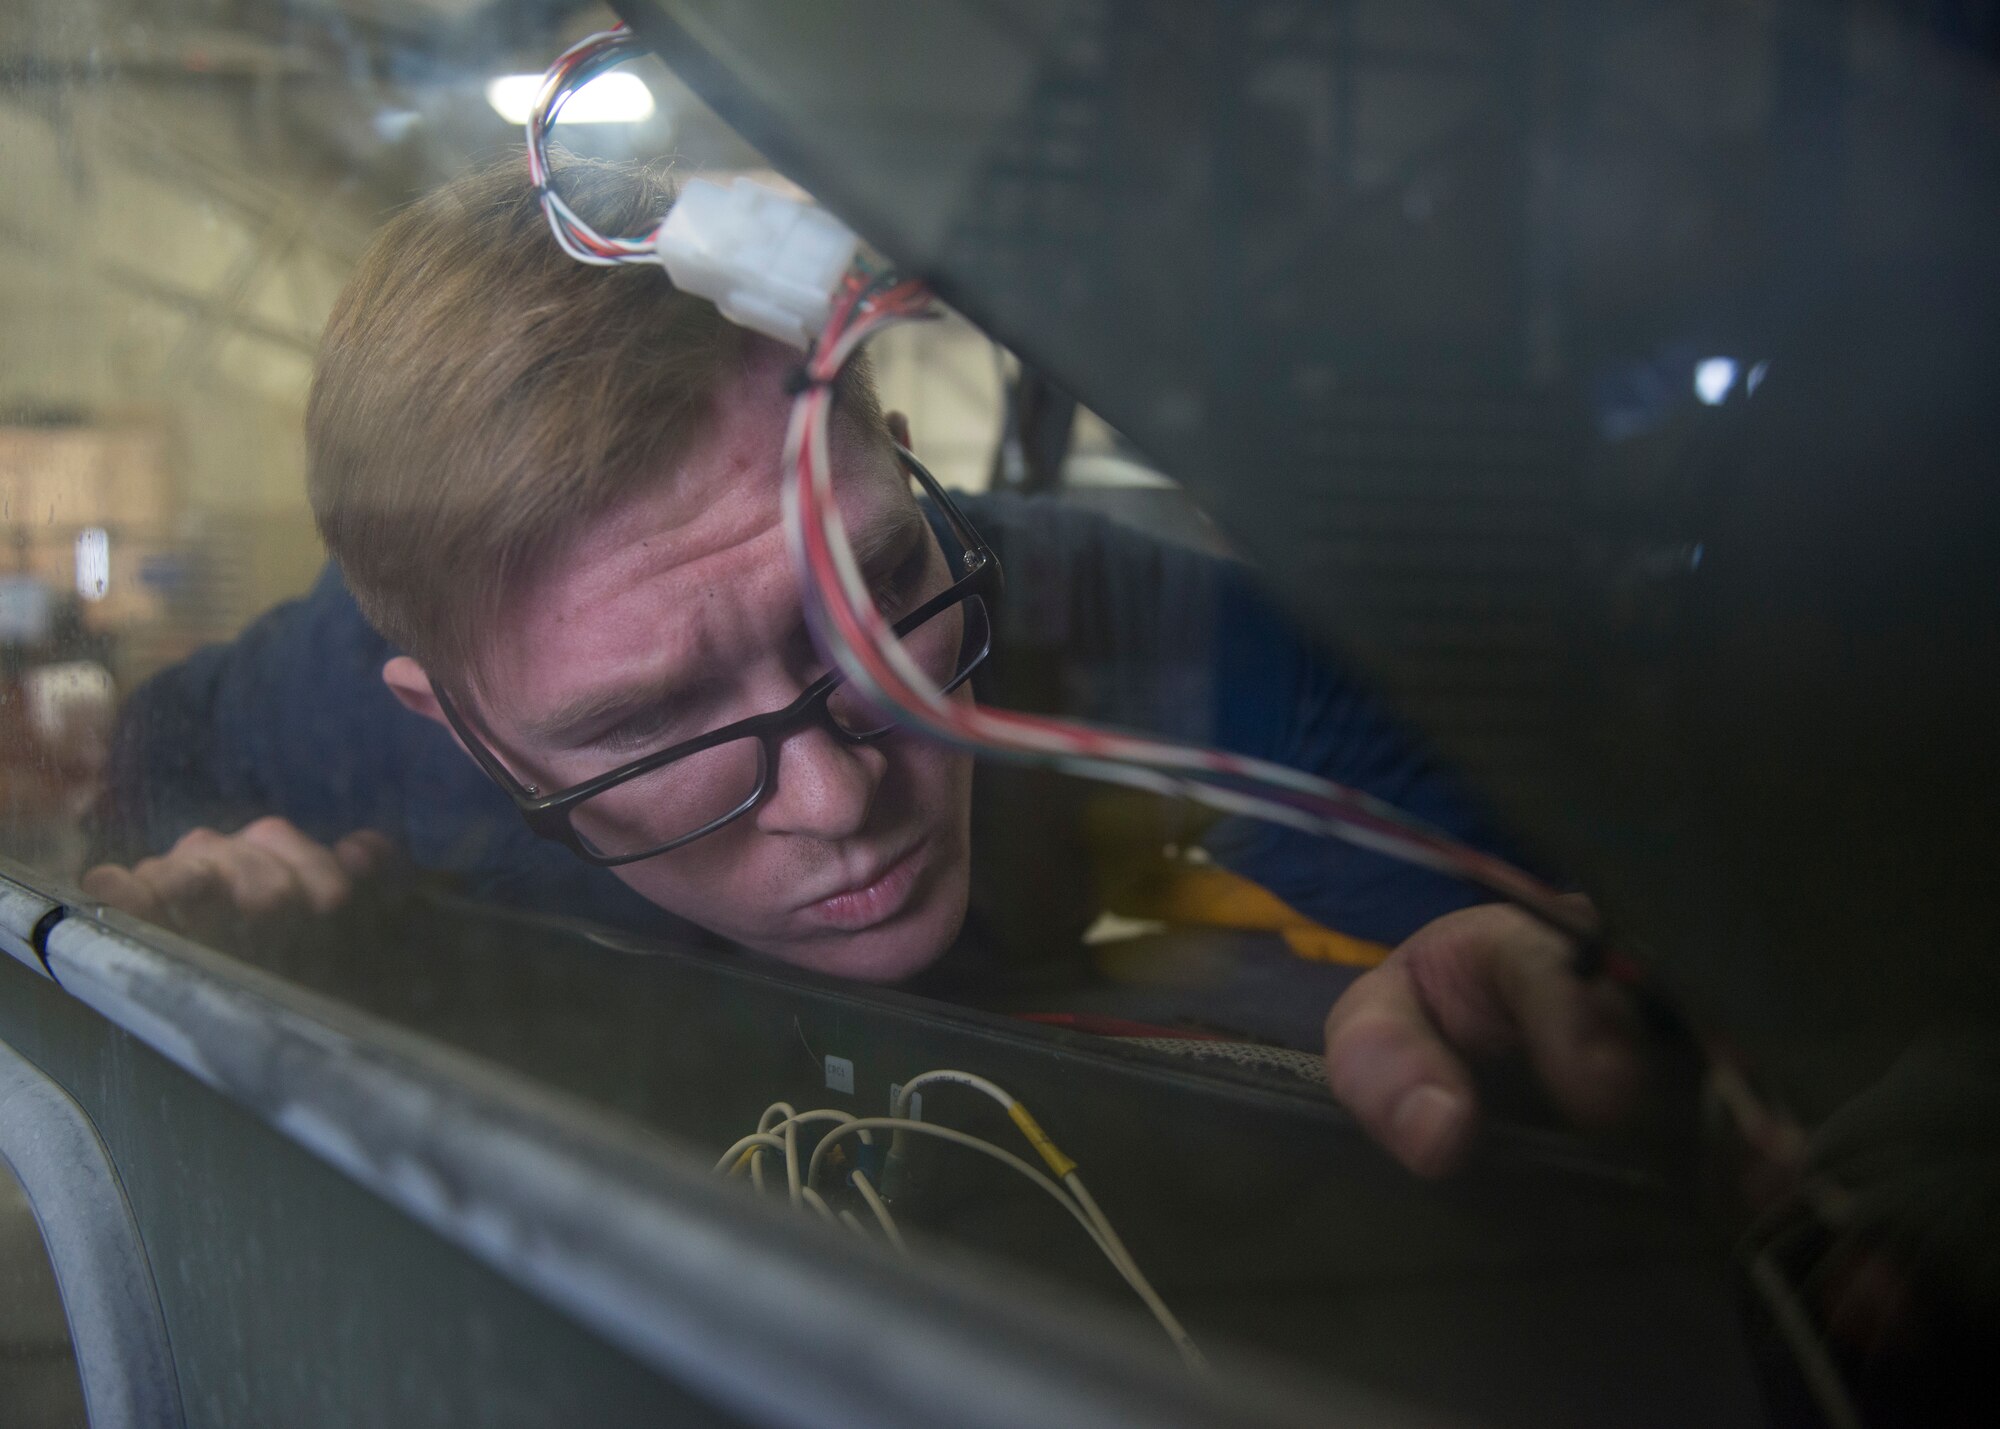 Airman 1st Class Craig Boudreau, a vehicle maintainer with the 673d Logistics Readiness Squadron, replaces a circuit breaker on a Global de-icer 1800 March 6, 2018, at Joint Base Elmendorf-Richardson, Alaska. Boudreau was handpicked to travel with an extended-reach deicer from Joint Base Elmendorf-Richardson, Alaska, to Gangneung Air Base, Republic of Korea, in support of Vice President of the United States Michael Pence’s visit to the Pyeongchang 2018 Winter Olympics.